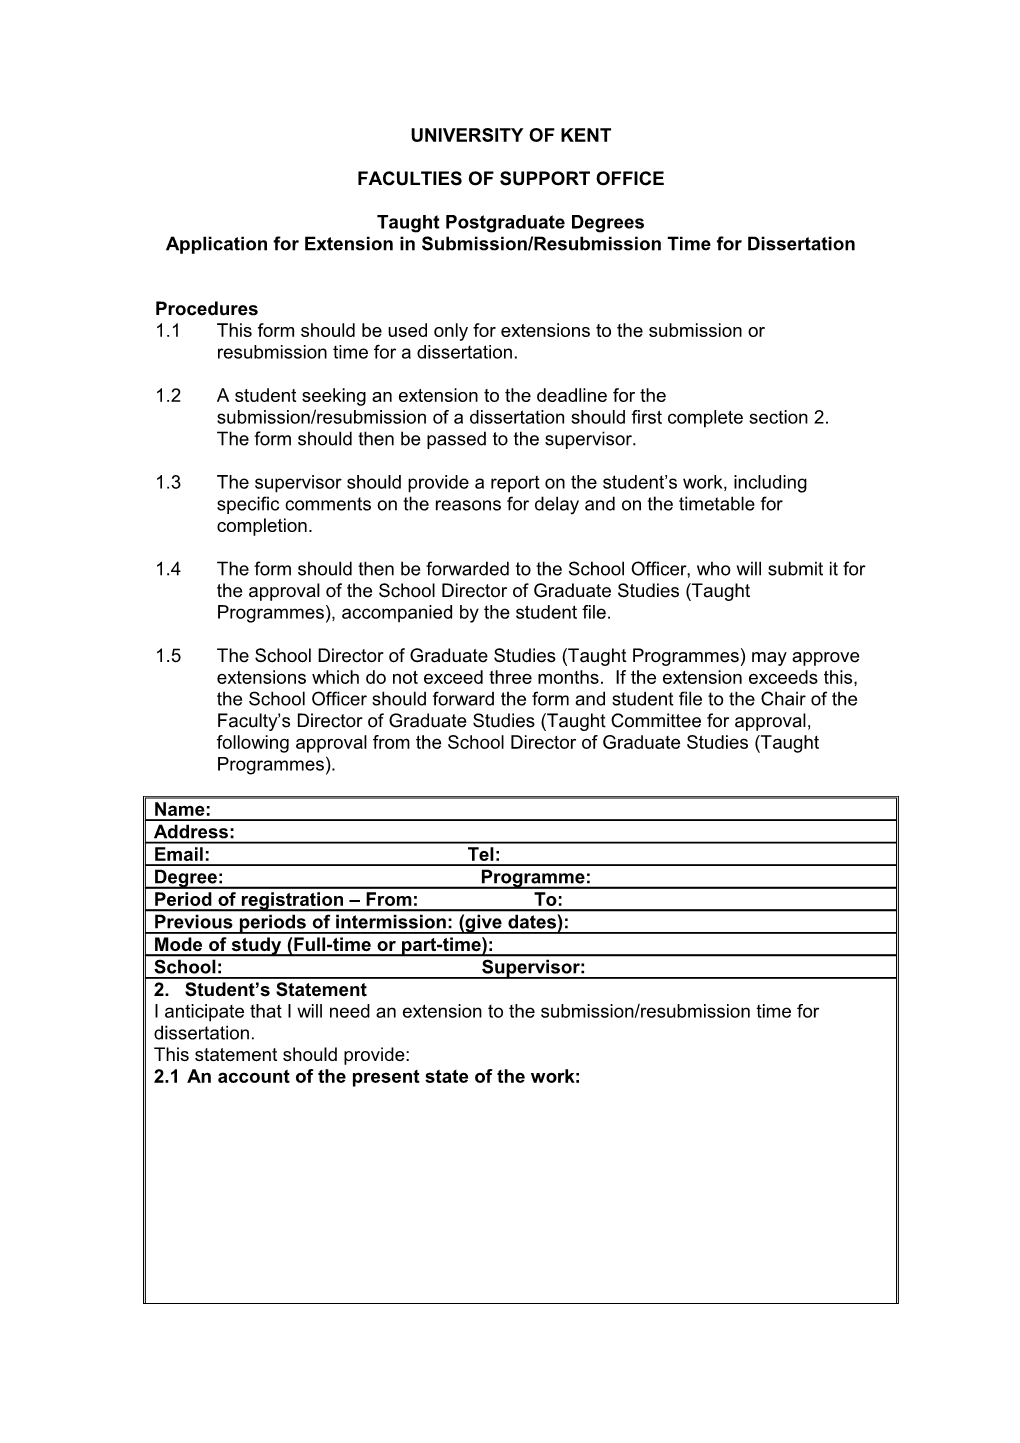 Application for Extension in Submission Time for Thesis